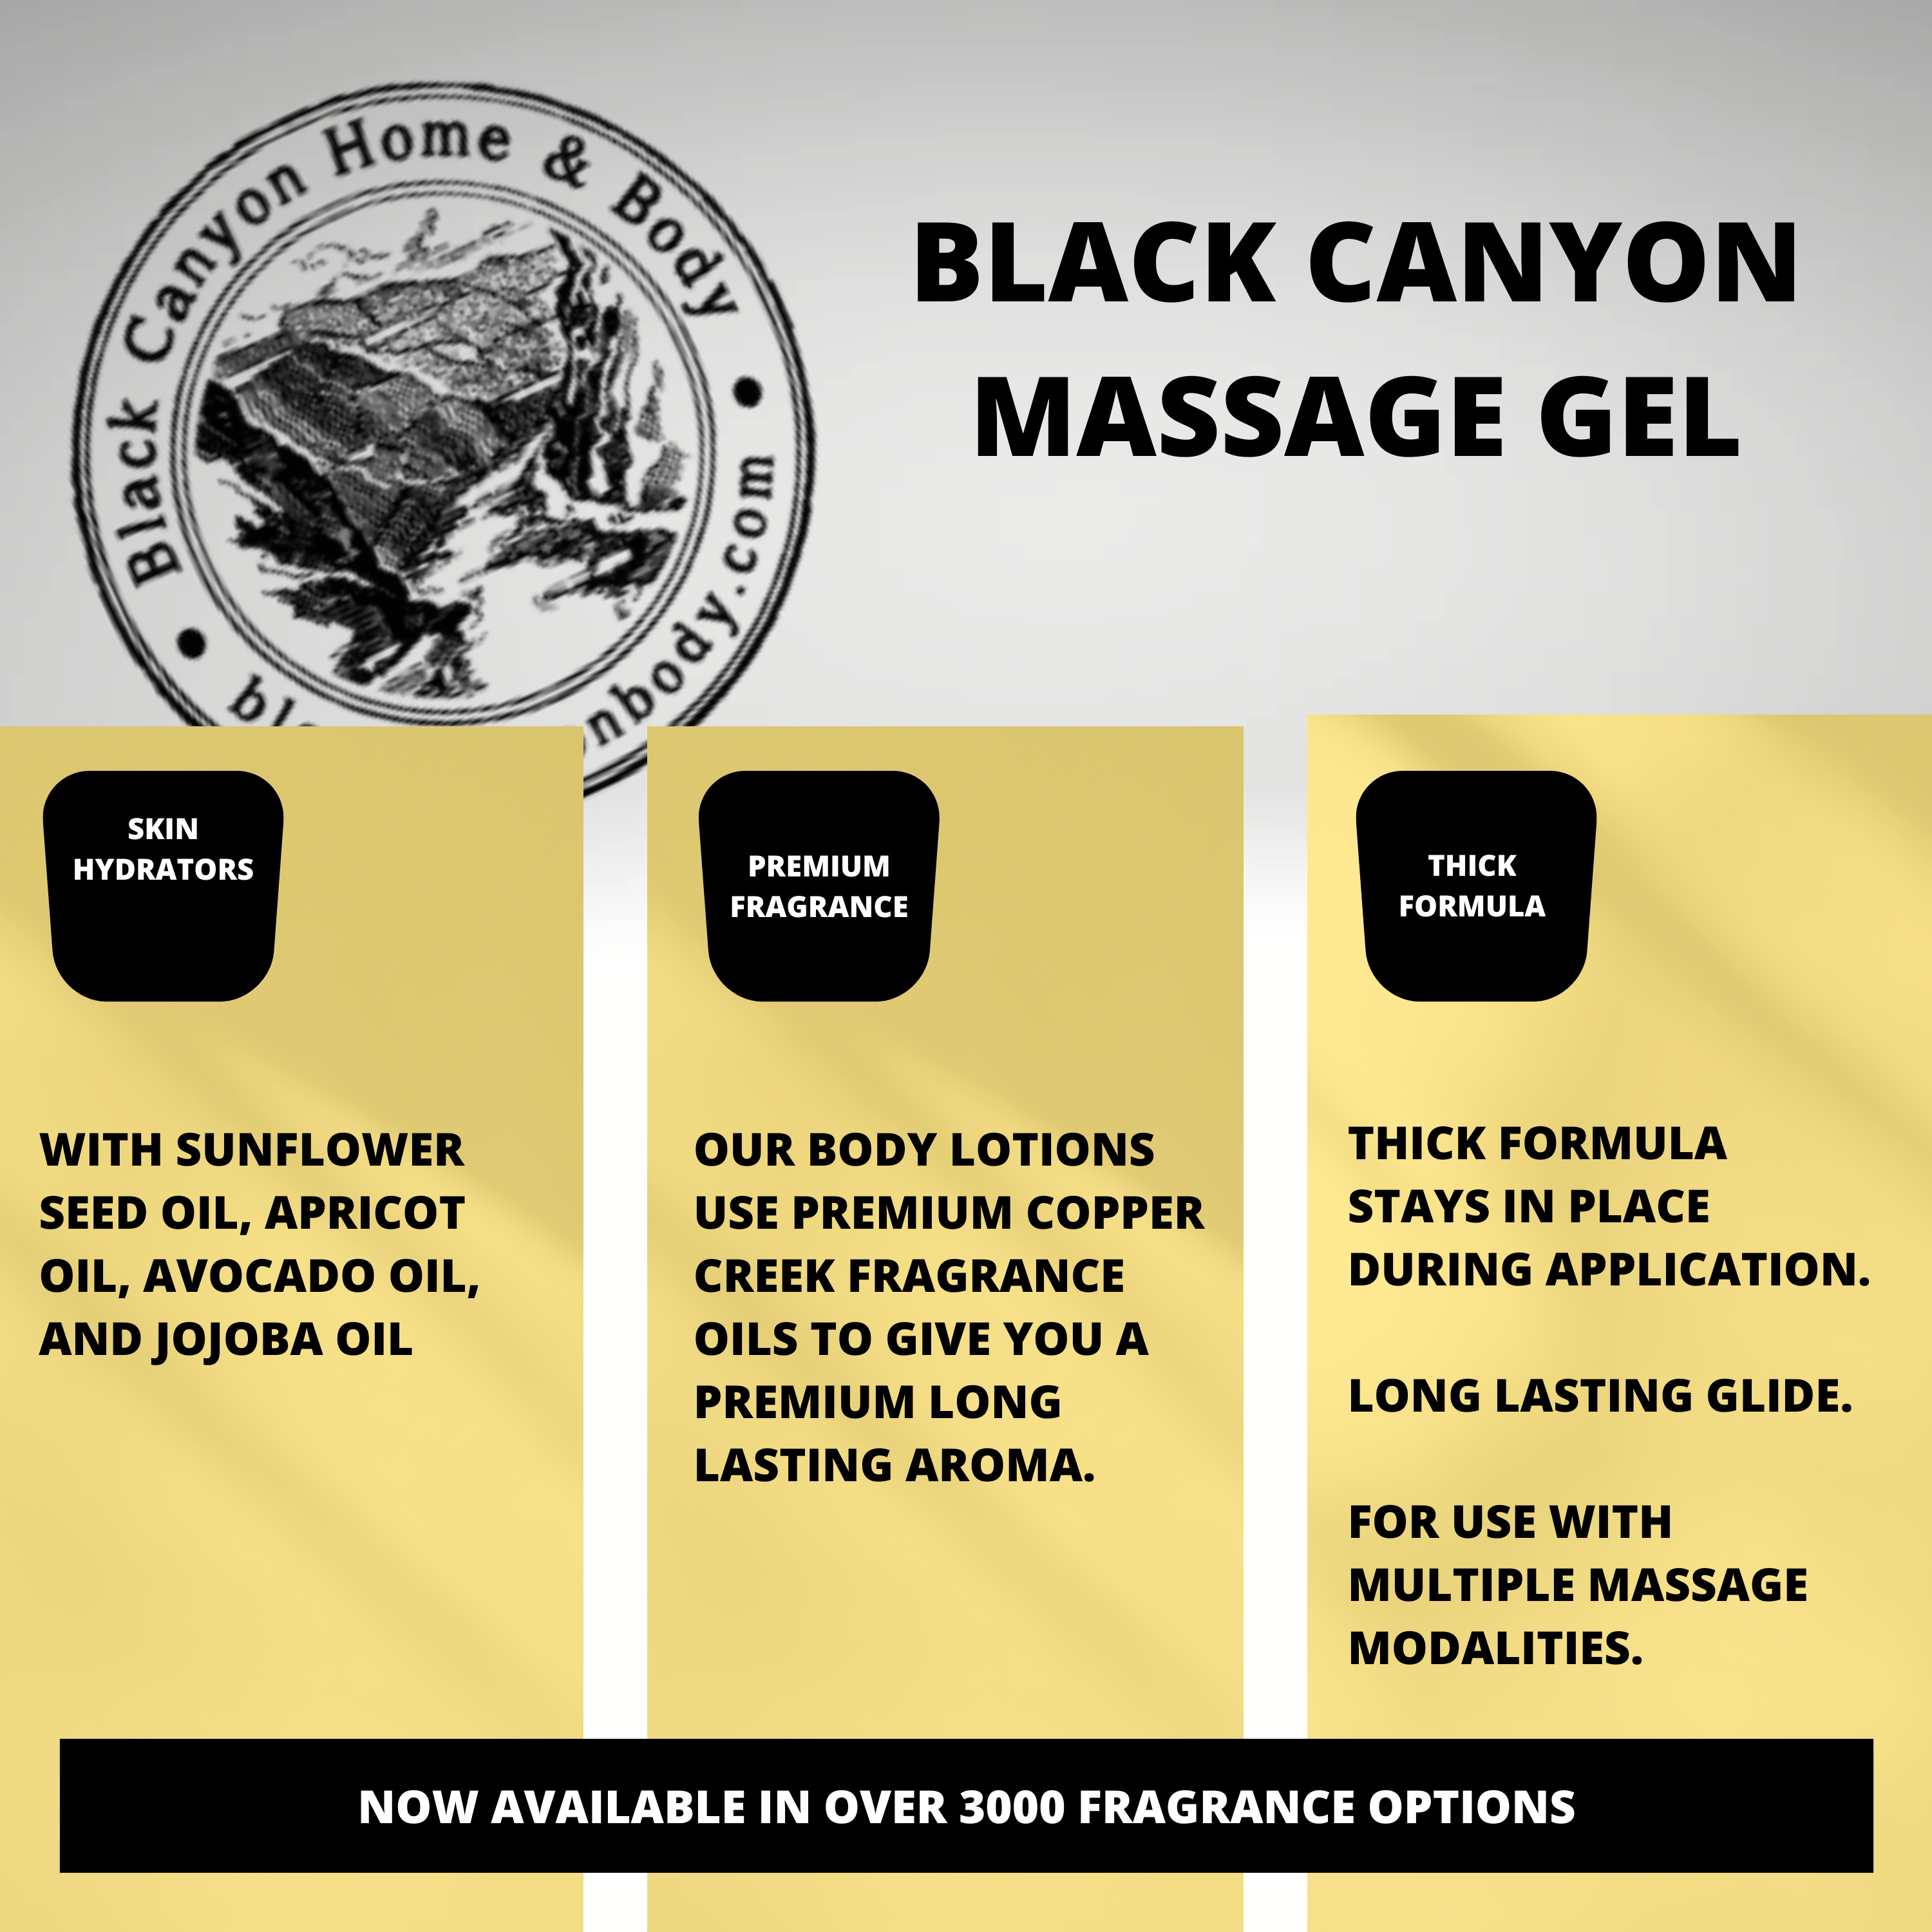 Black Canyon Cranberry & Clementine Scented Massage Gel